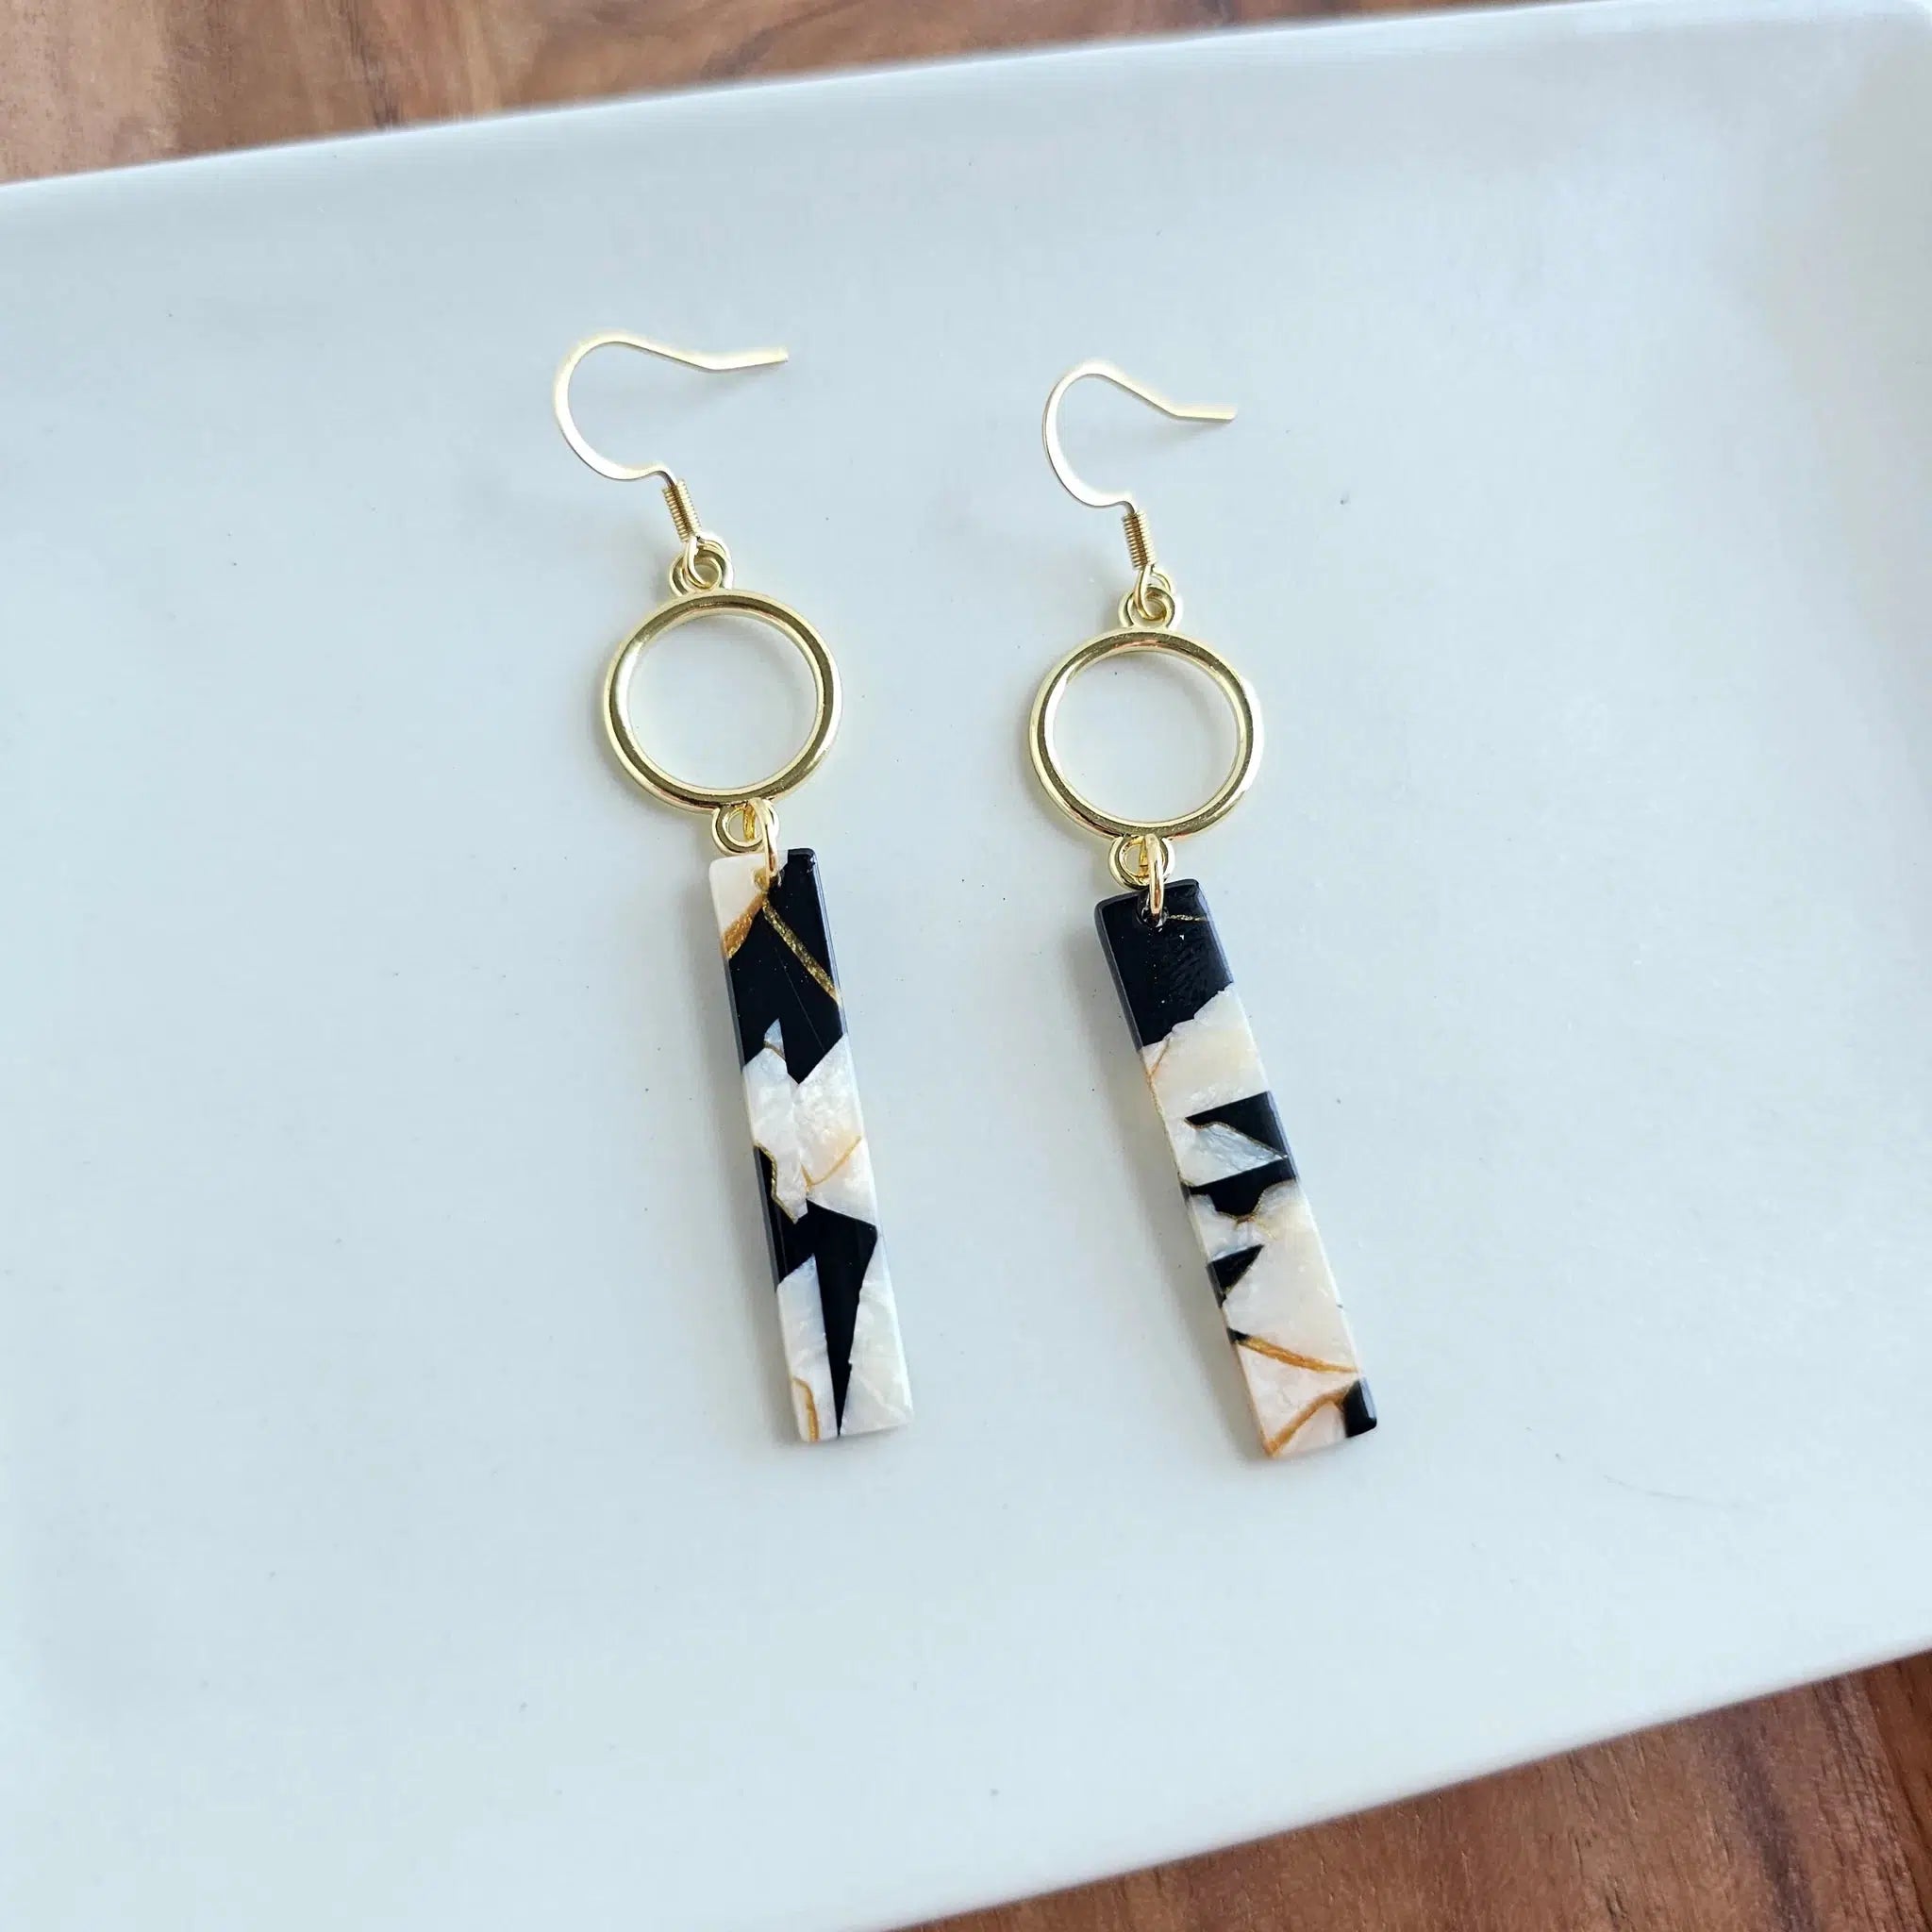 Shop Isabella Earrings - Onyx and Pearl-Earrings at Ruby Joy Boutique, a Women's Clothing Store in Pickerington, Ohio